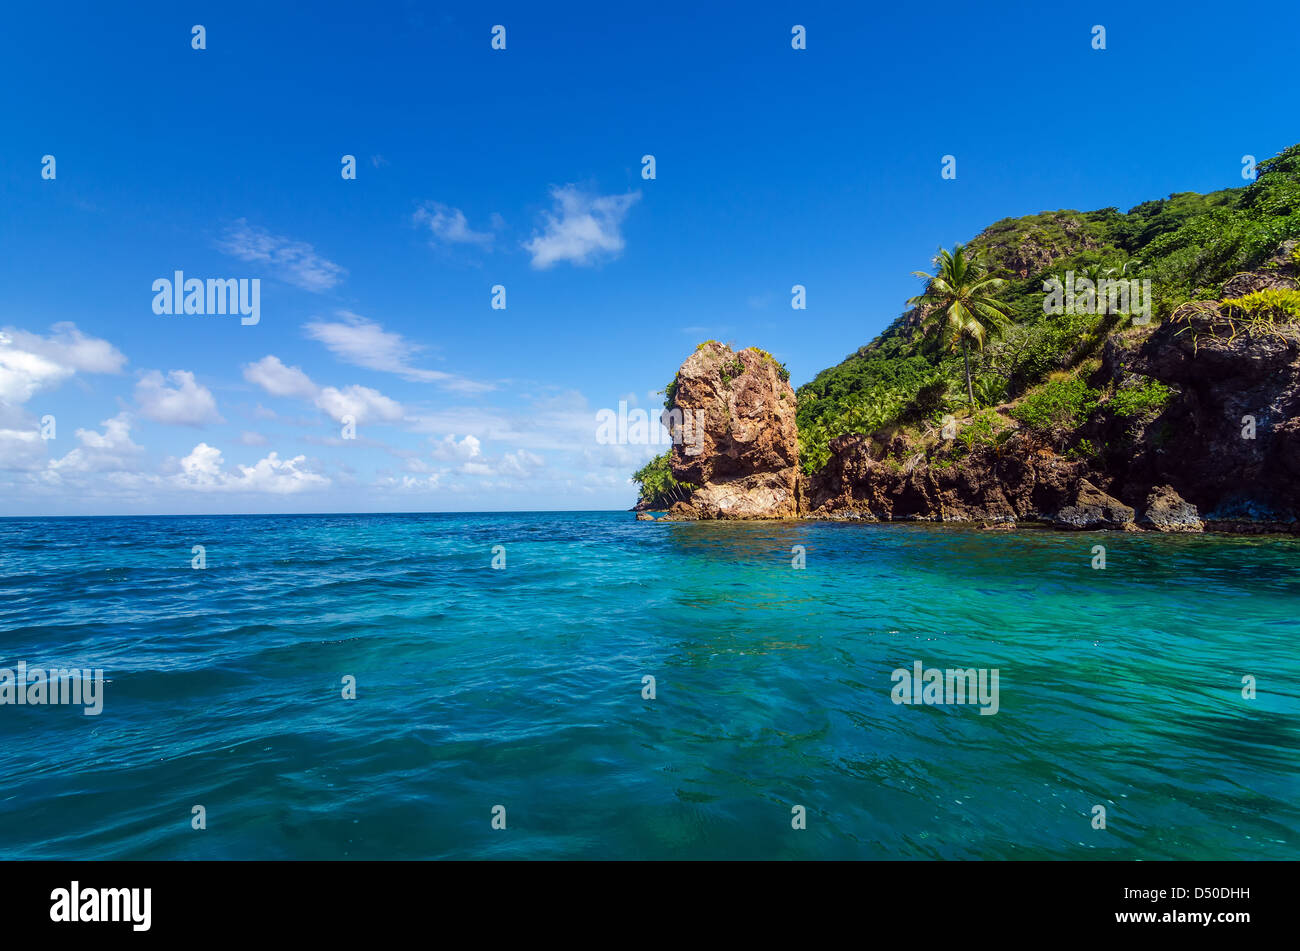 View of Morgan's Head natural rock formation in San Andres y Providencia, Colombia Stock Photo